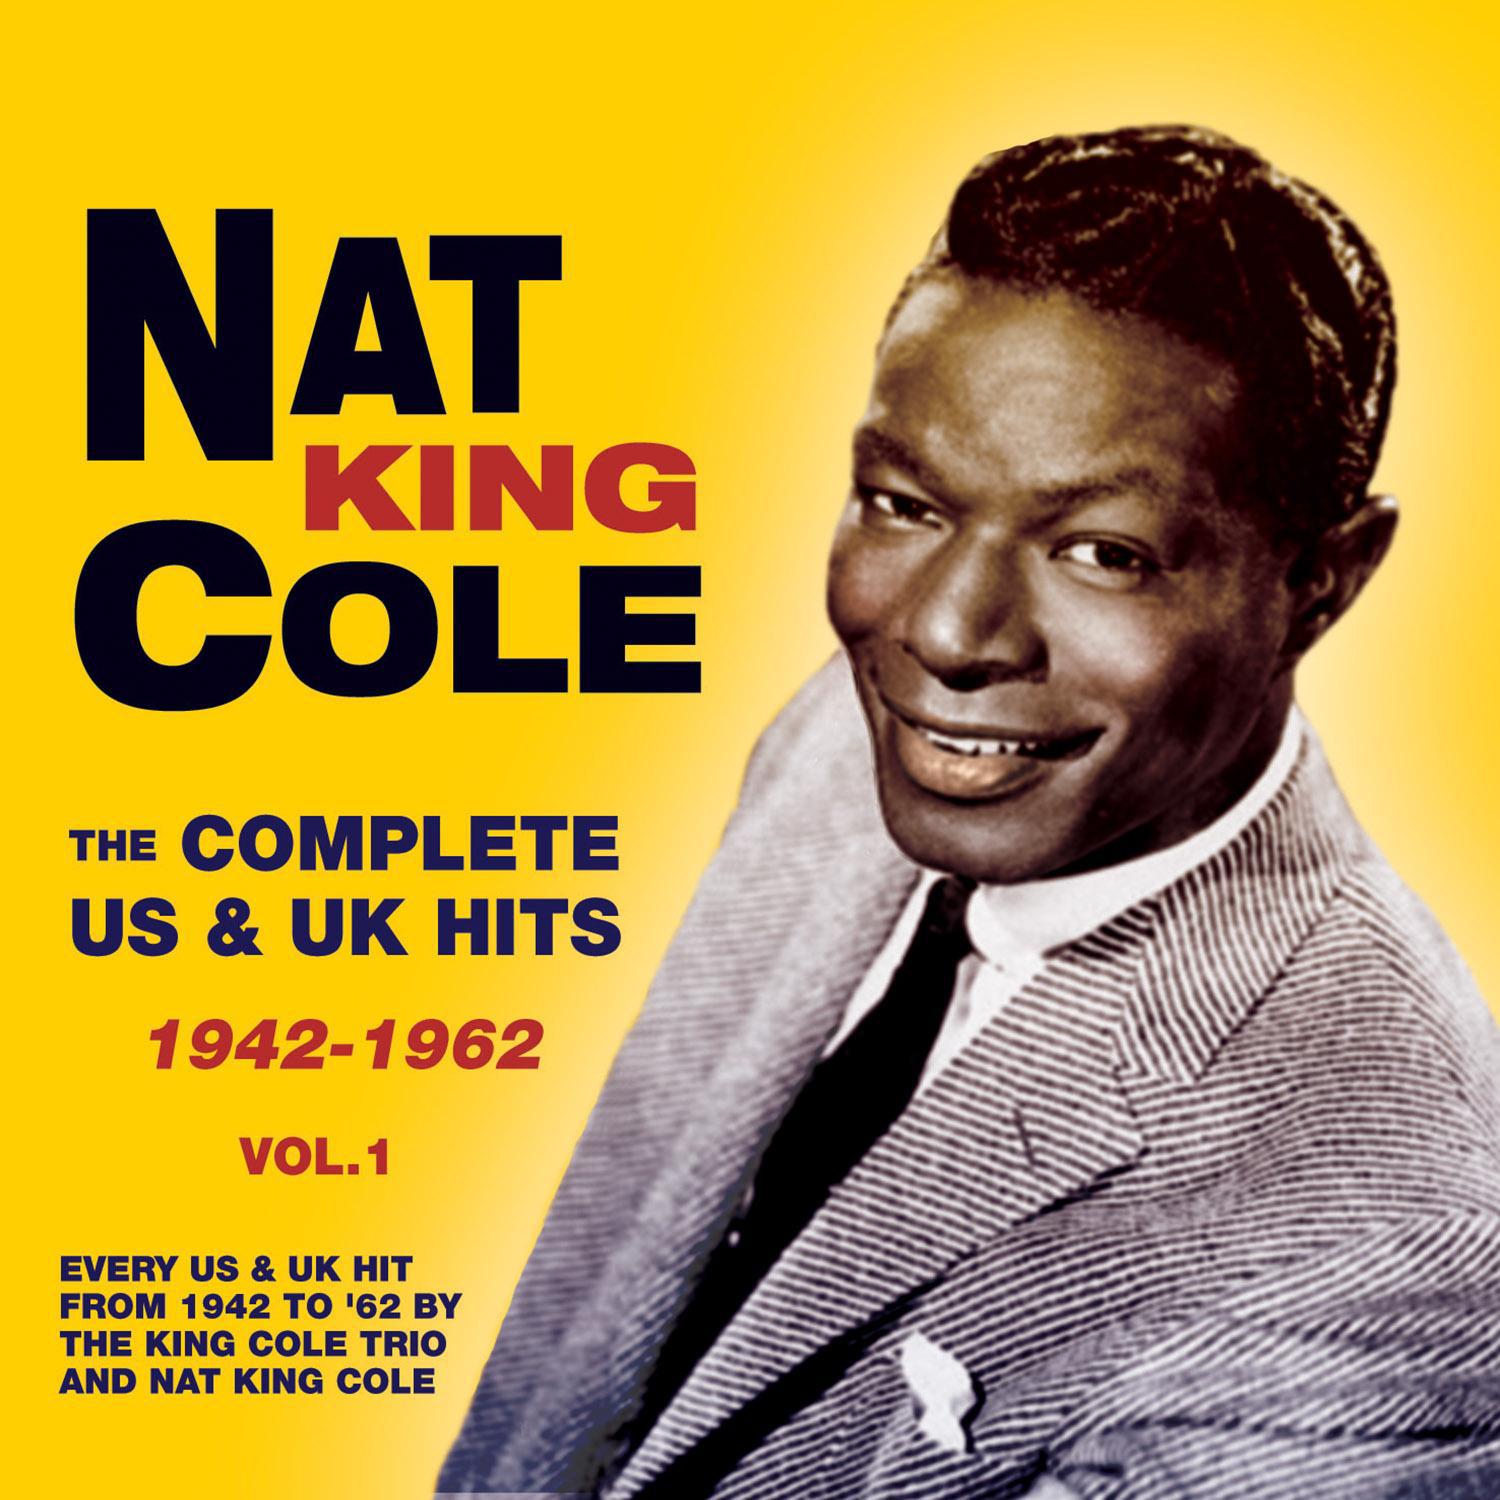 The Complete Us & Uk Hits 1942-62, Vol. 1